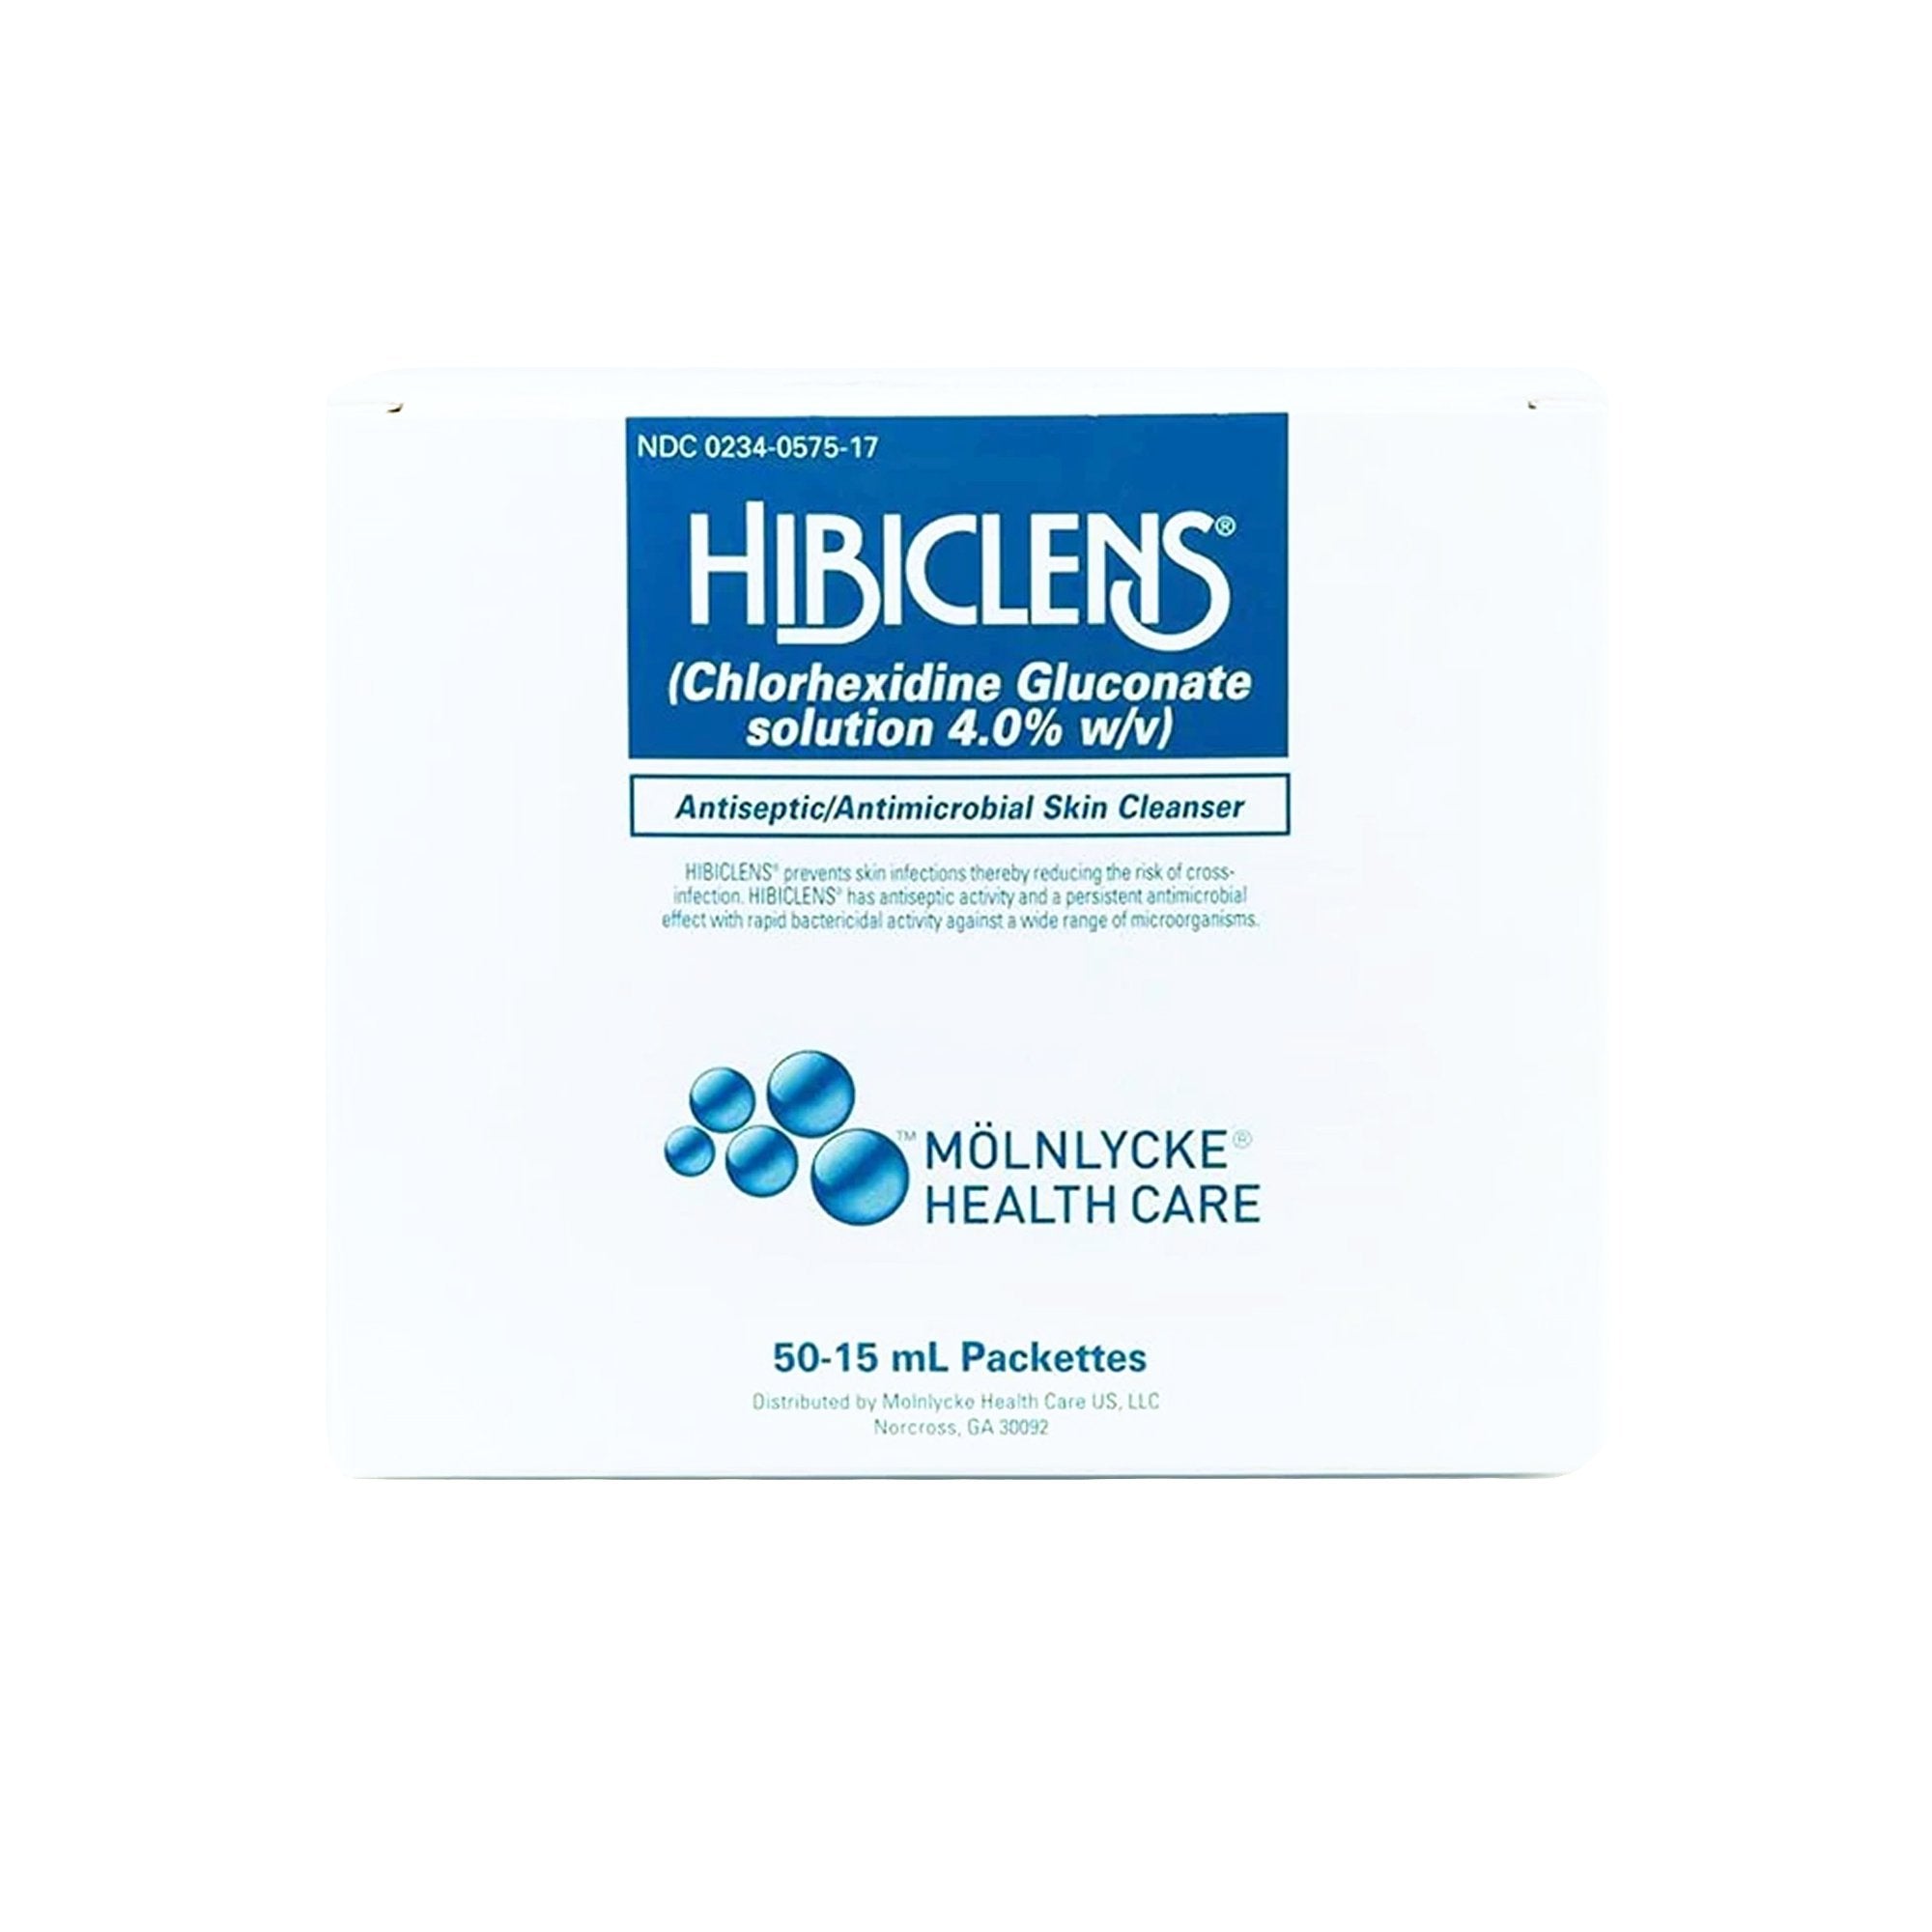 Antiseptic / Antimicrobial Skin Cleanser Hibiclens 15 mL Individual Packet 4% Strength CHG (Chlorhexidine Gluconate) NonSterile